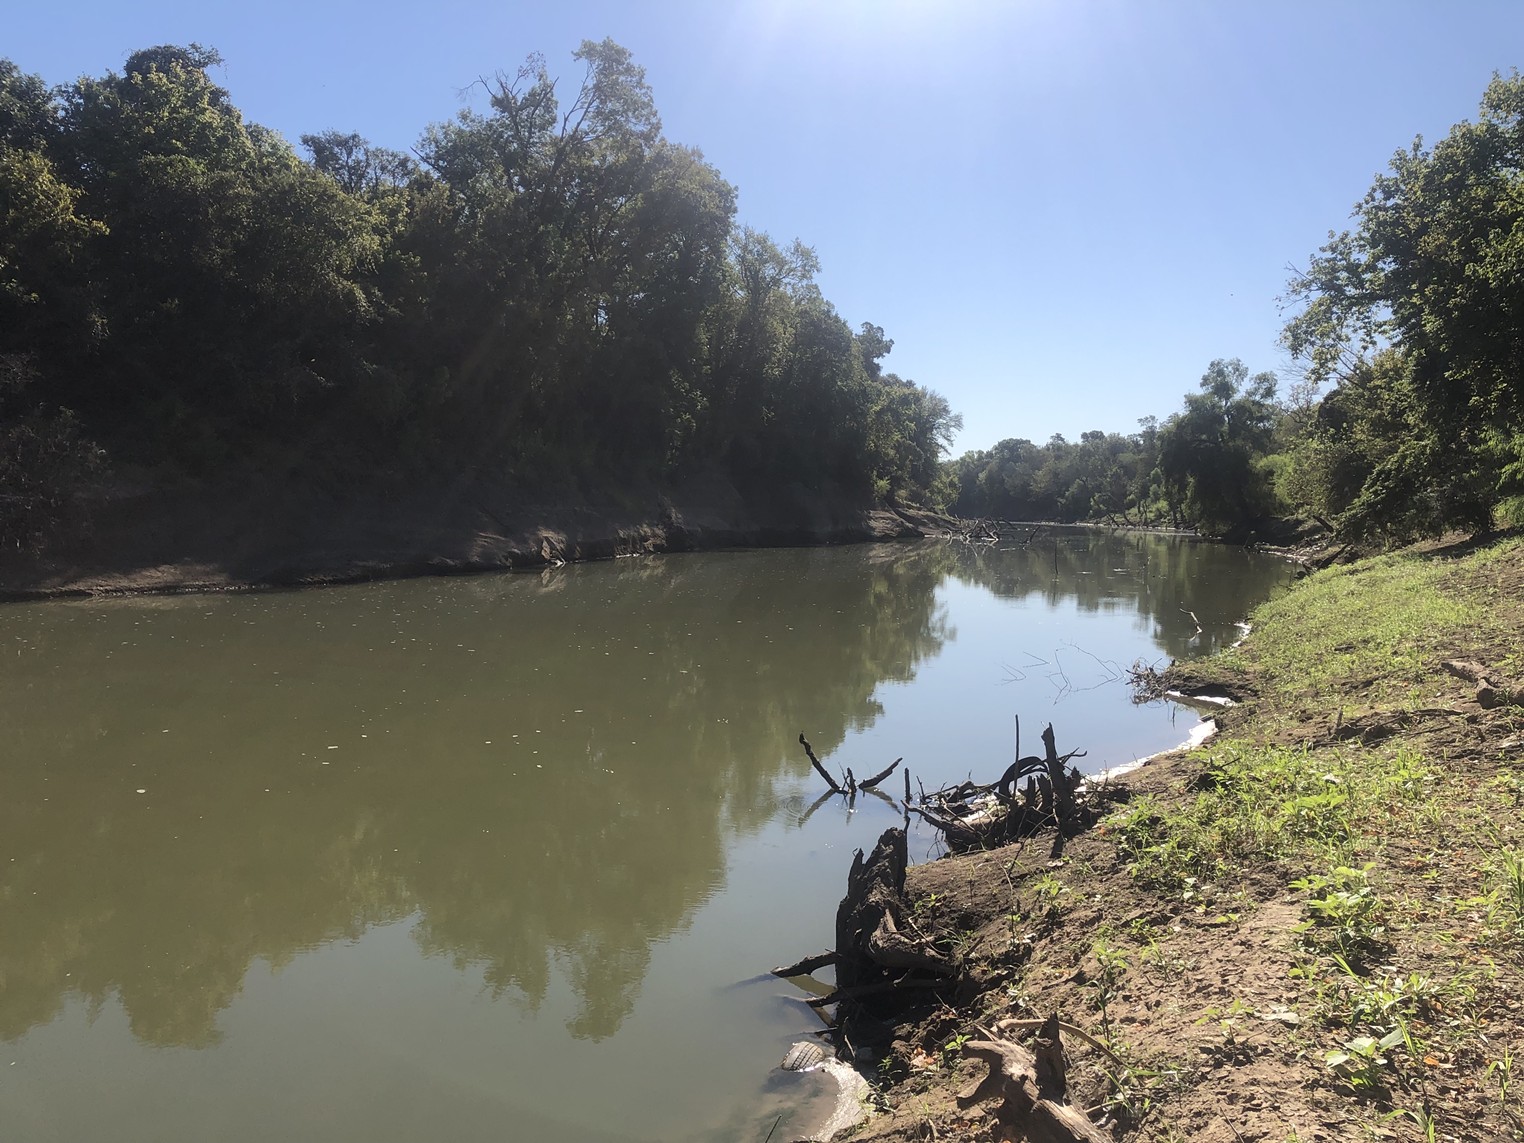  In May, Some 270 Gallons of Sewage from Wilmer Sprayed into Dallas County's Goat Island Preserve 